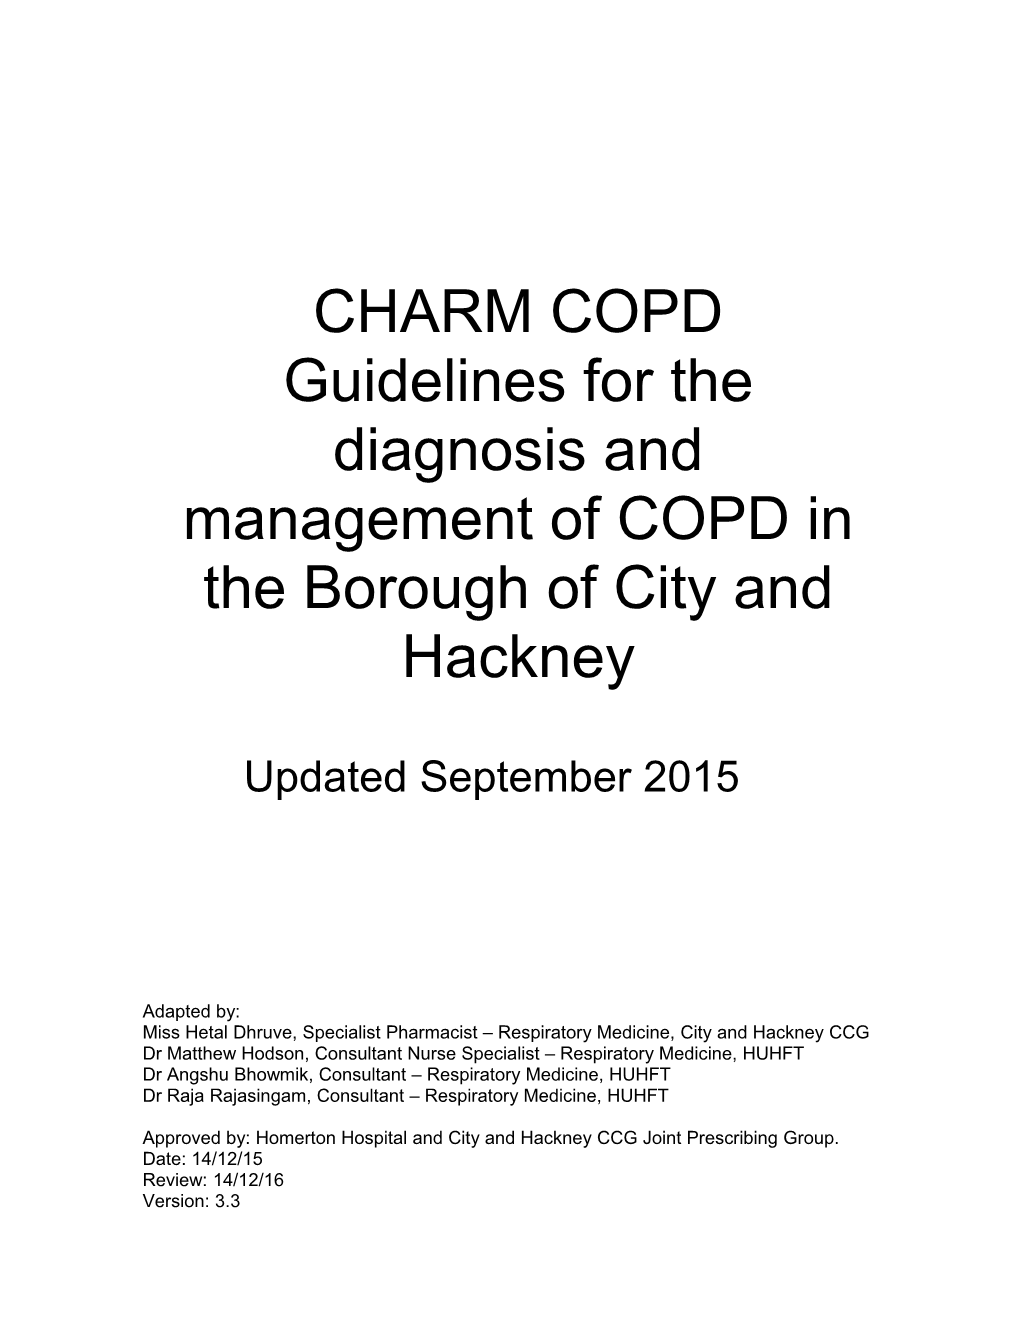 Charmcopdguidelines for Thediagnosisand Management Ofcopd Inthe Boroughofcity Andhackney